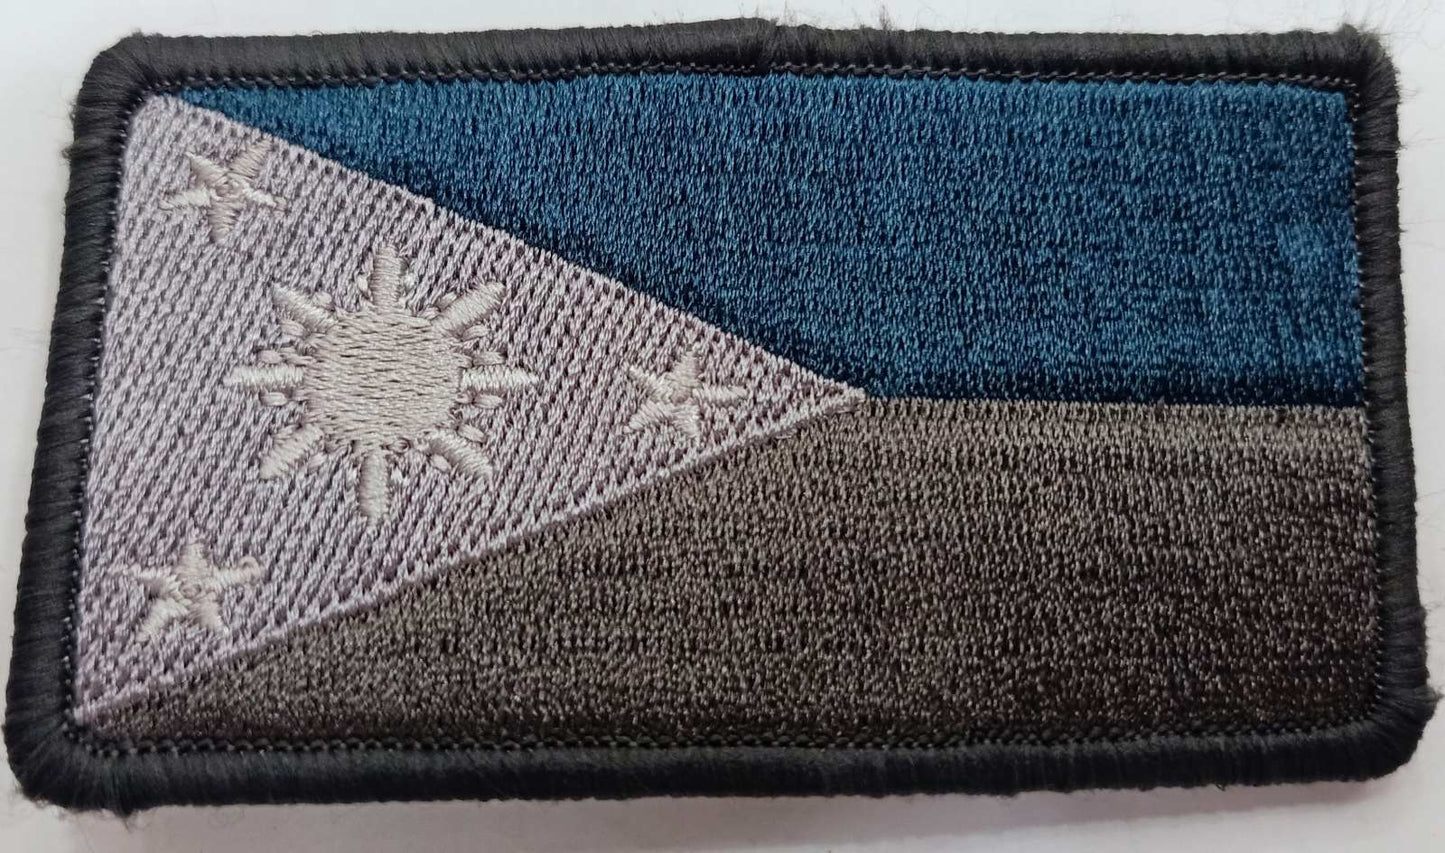 Embroidered Philippine Flag Morale Patch